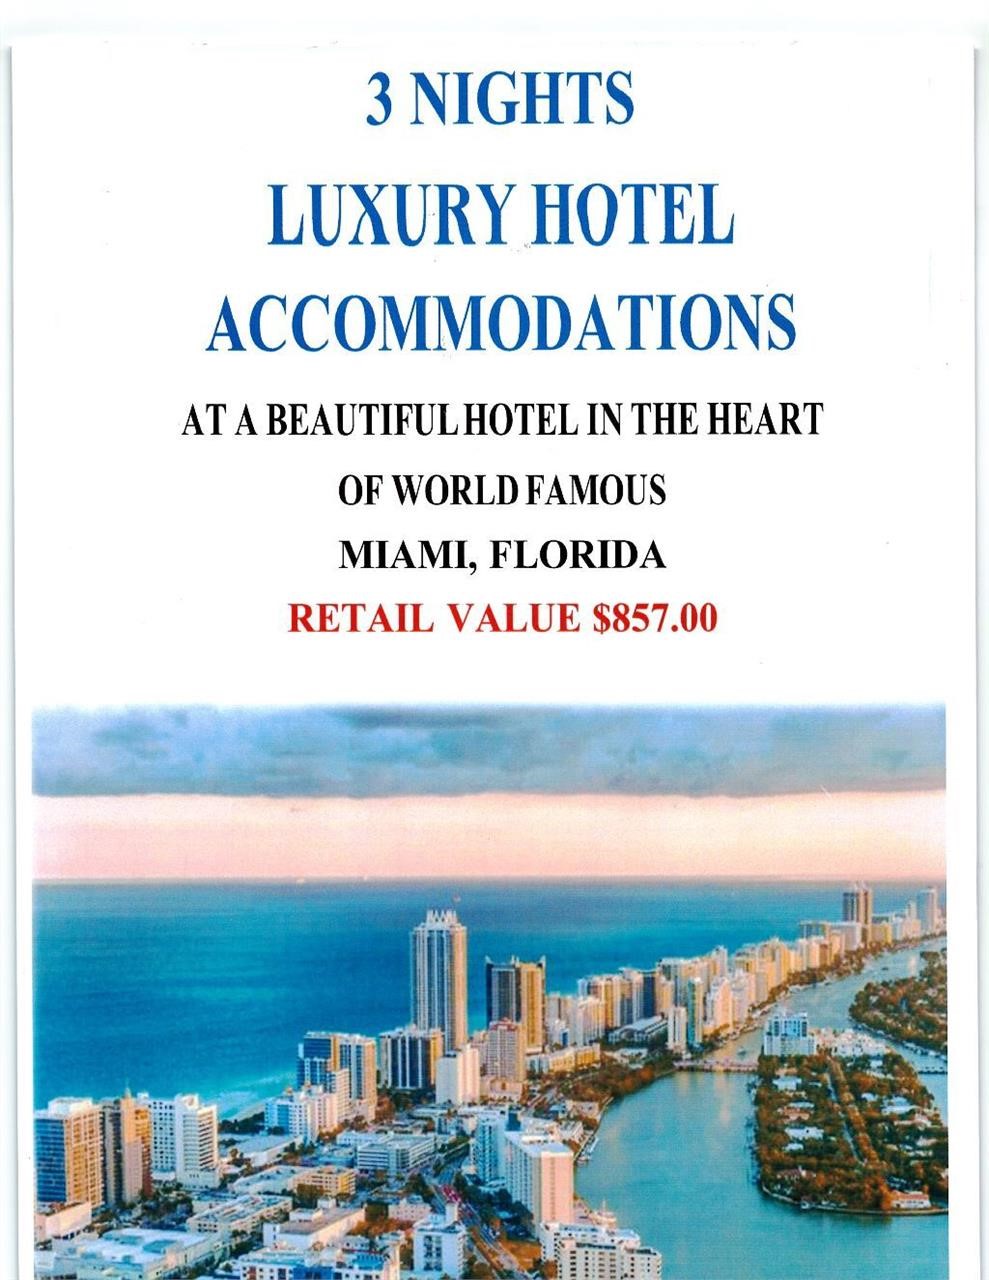 MAY 16TH. Vacation Hotel Accommodation Packages Auction